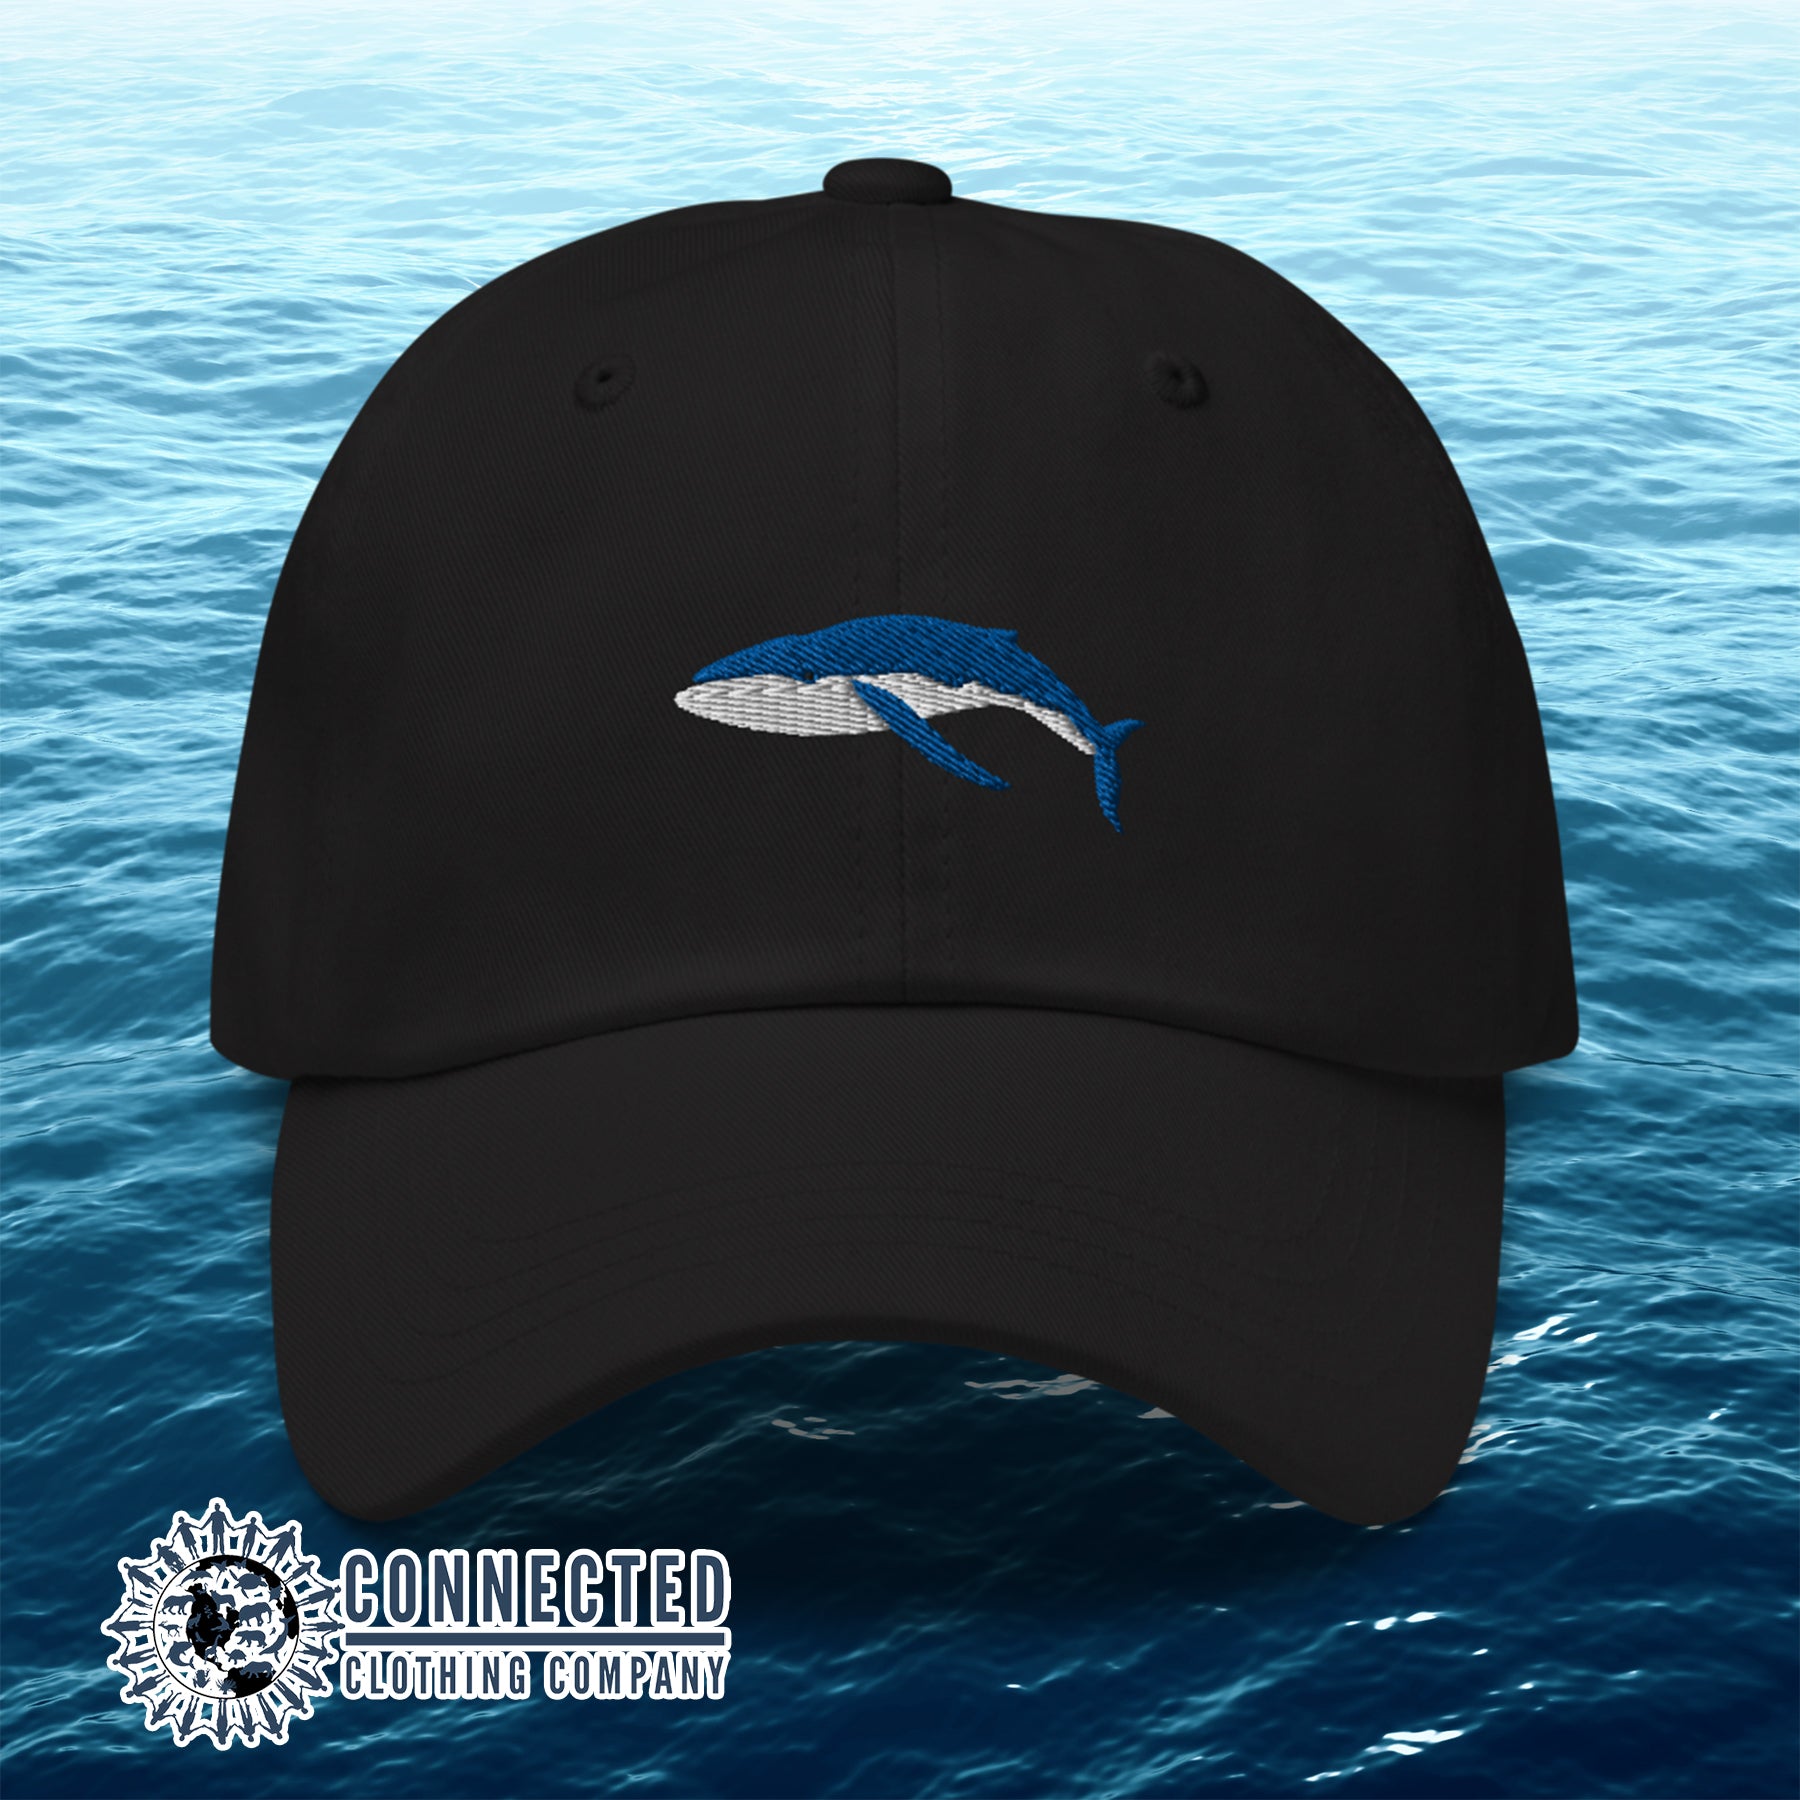 Black Humpback Whale Cotton Cap - Connected Clothing Company - 10% of profits donated to Mission Blue ocean conservation